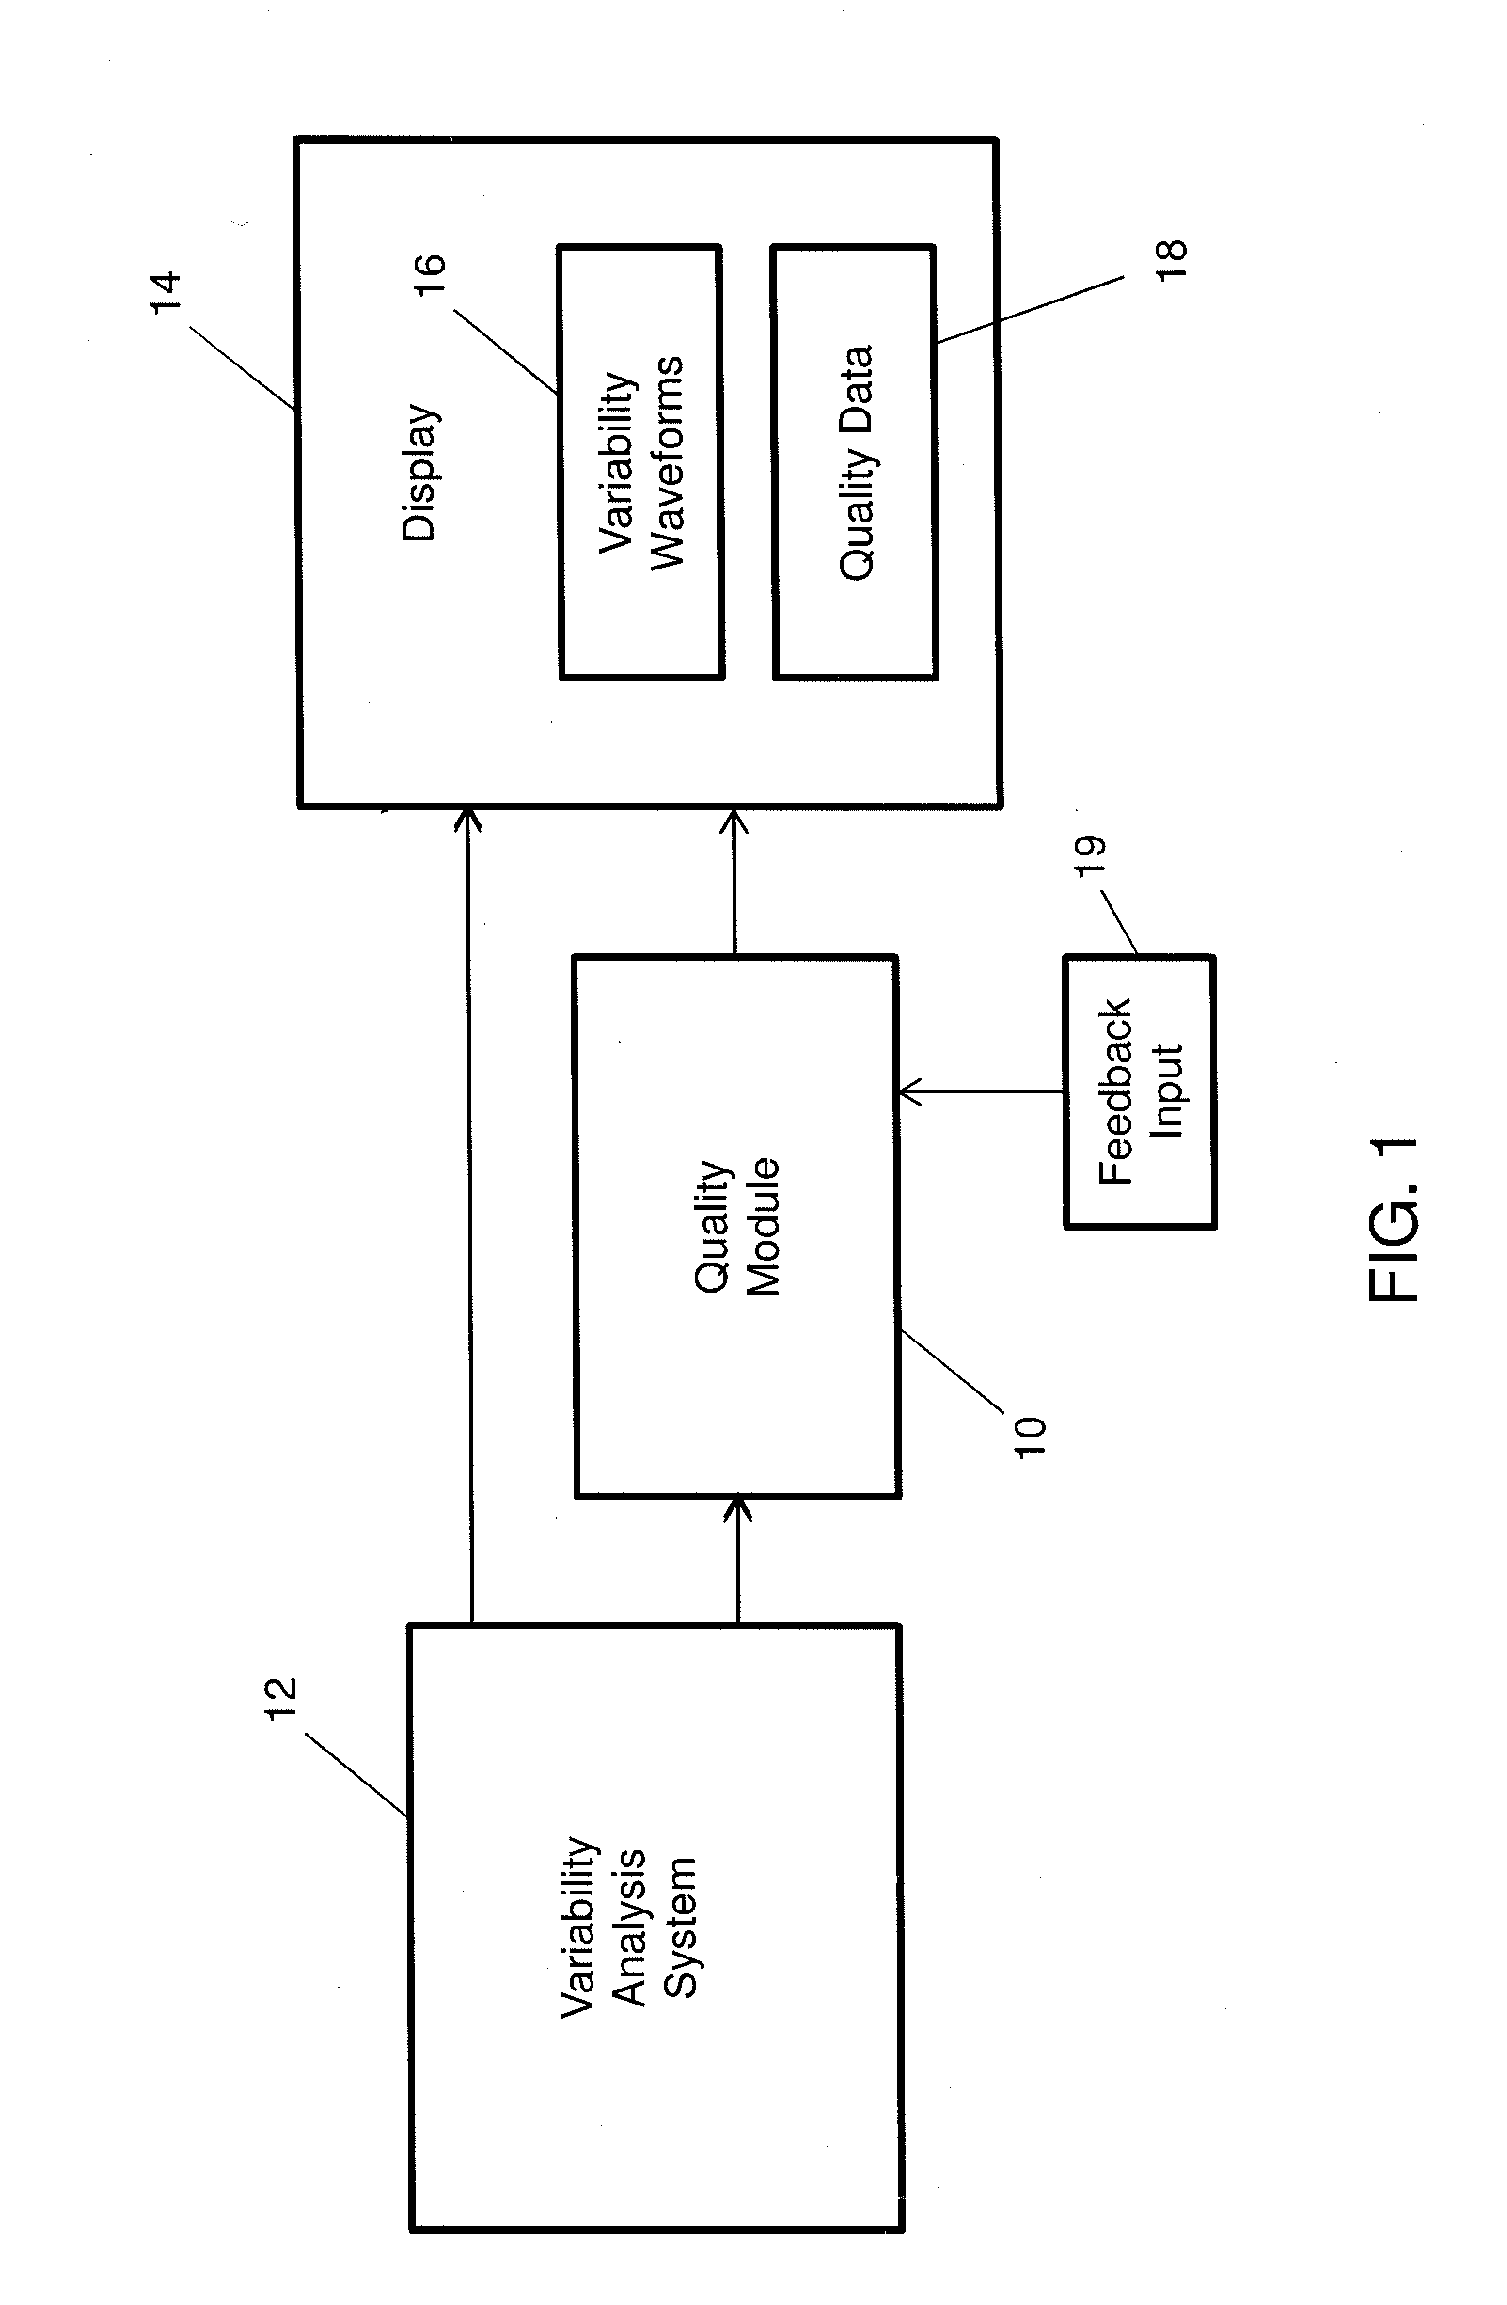 Method for Multi-Scale Quality Assessment for Variability Analysis